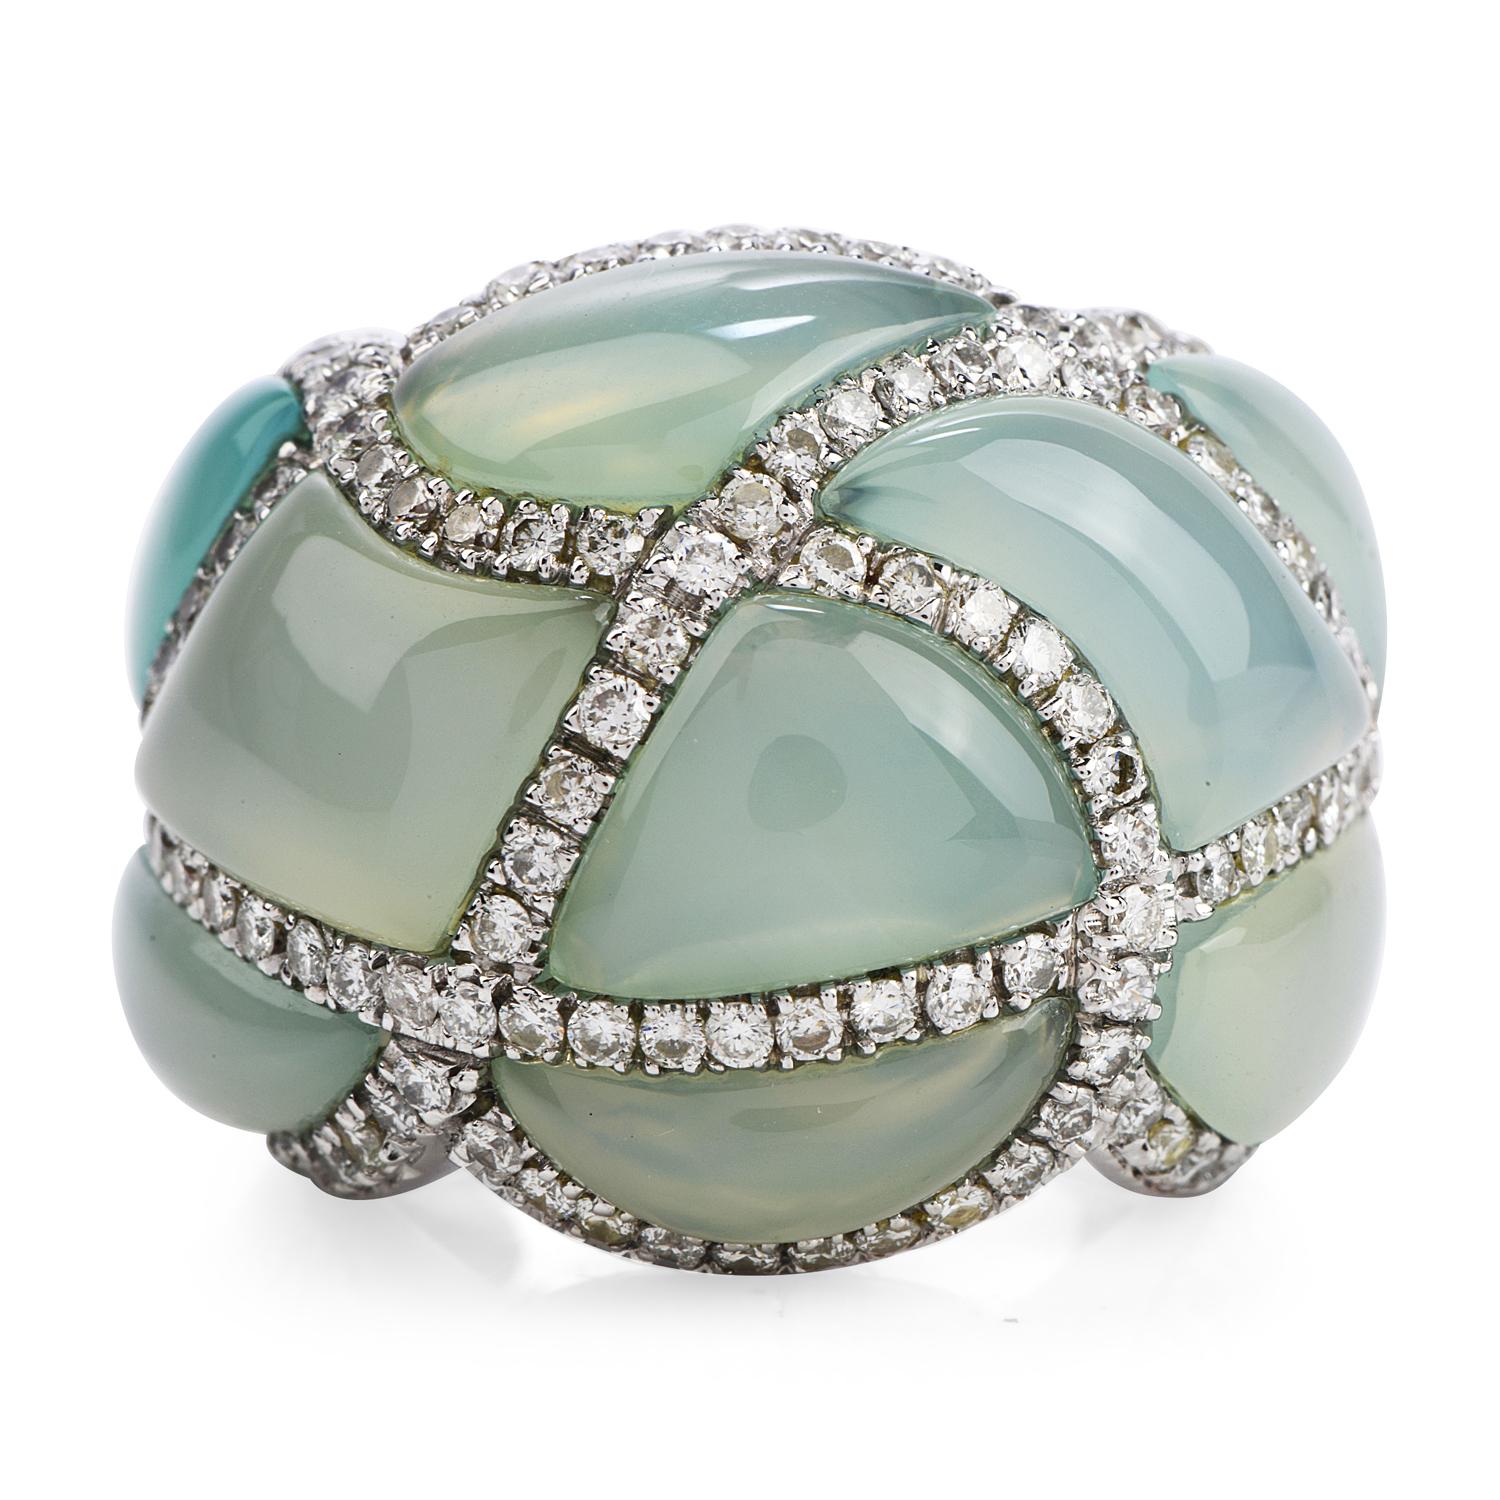 This regal design will captivate everyone.

Featuring 9 large pieces of cabochon cut aquamarine accented by a criss cross pattern throughout of round brilliant cut diamonds.

Some 145 natural diamonds weigh cumulatively appx. 1.54 carats

and all